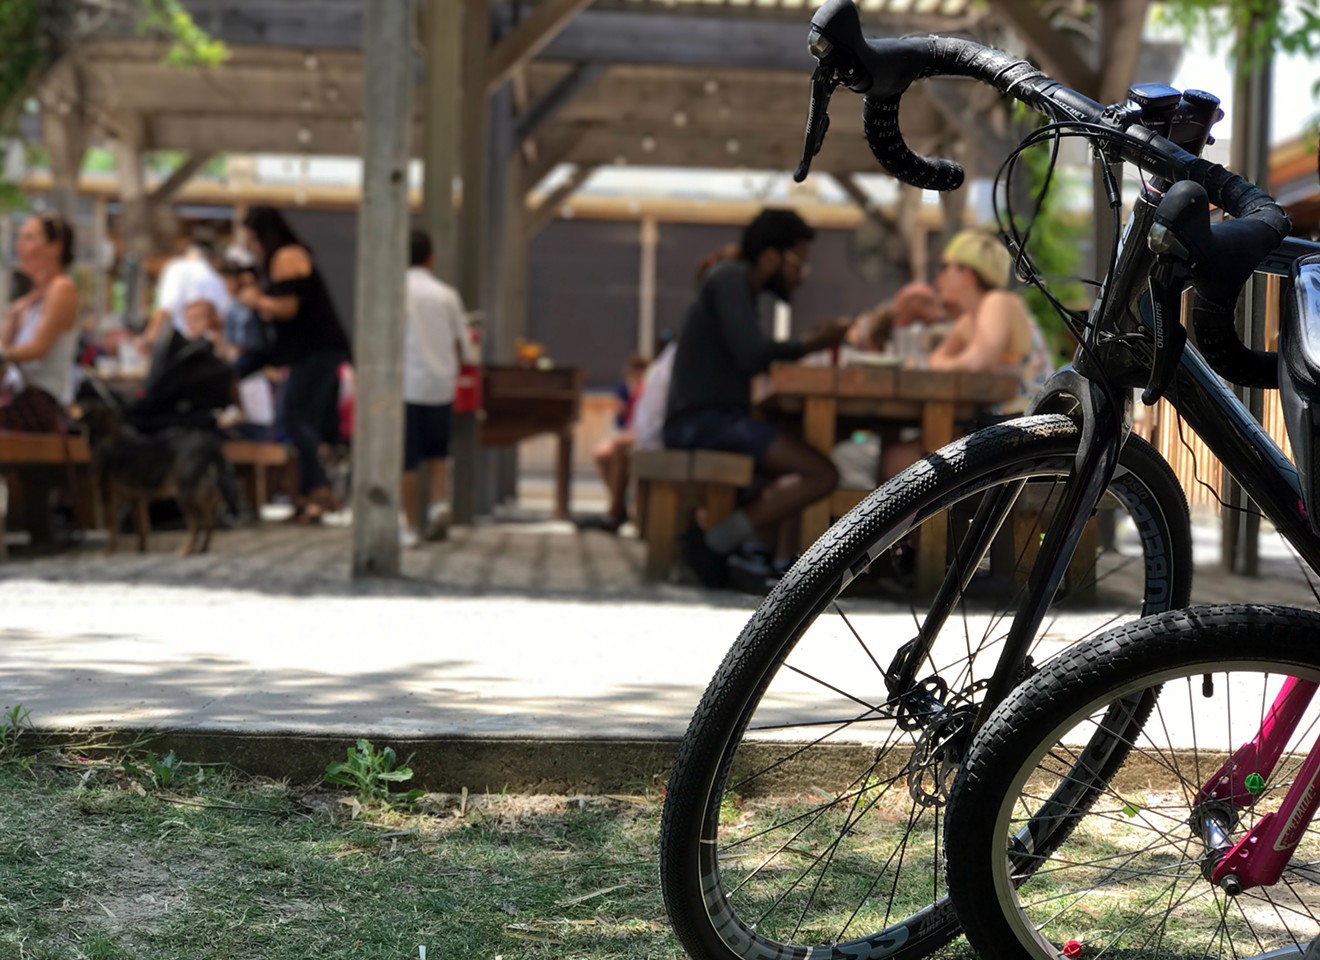 Everyone knows you can easily hit up The Lot by bike, thanks to its location off the Santa Fe Trail, but where else in Dallas can you easily grab a bite or a drink after a ride?